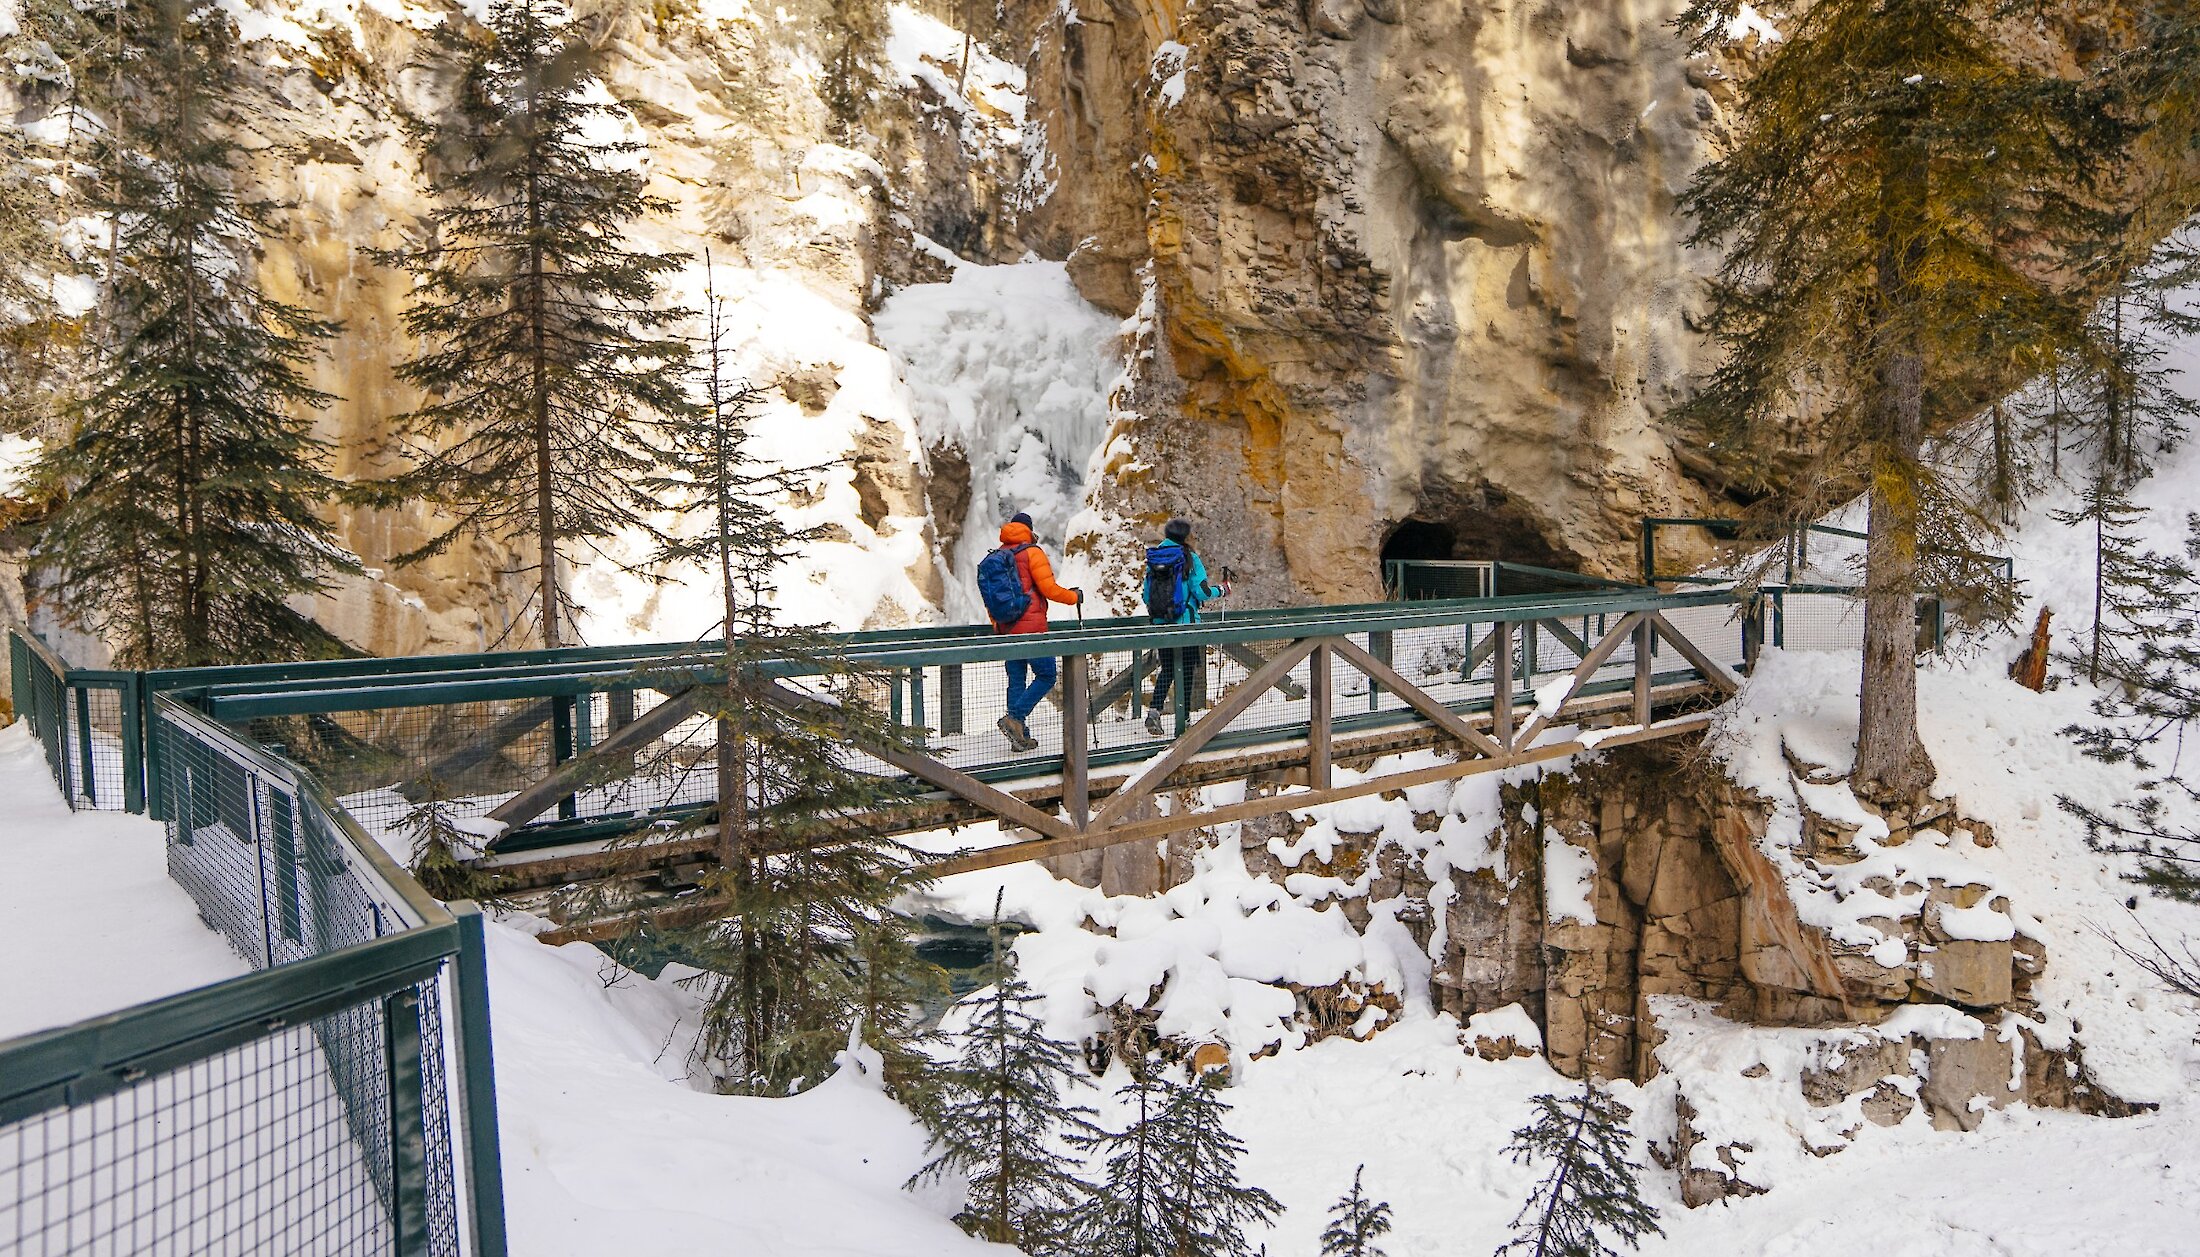 Walking along the frozen trails in Johnston Canyon